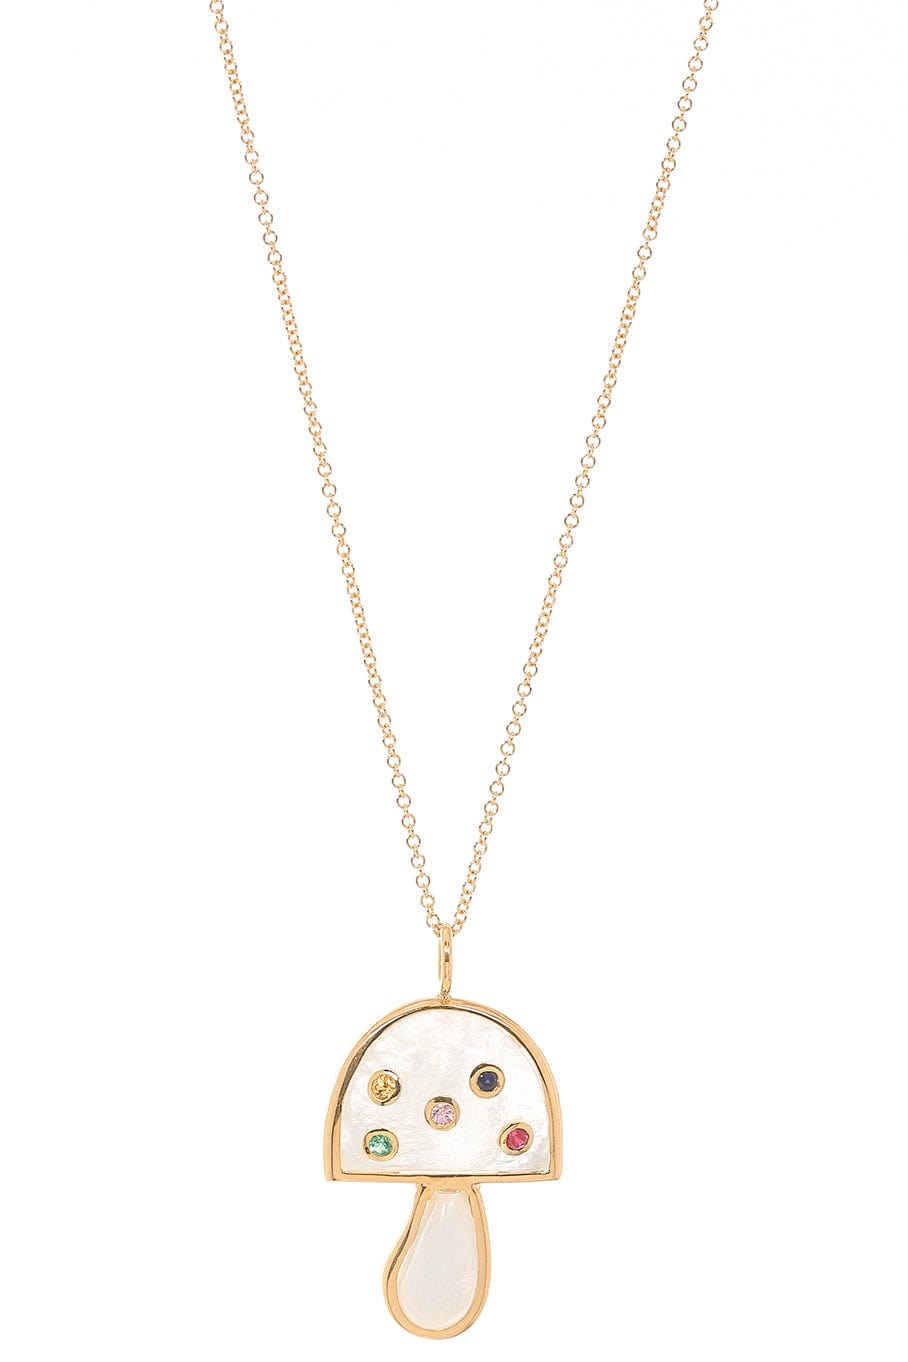 BRENT NEALE-Moostone Small Mushroom Necklace-YELLOW GOLD